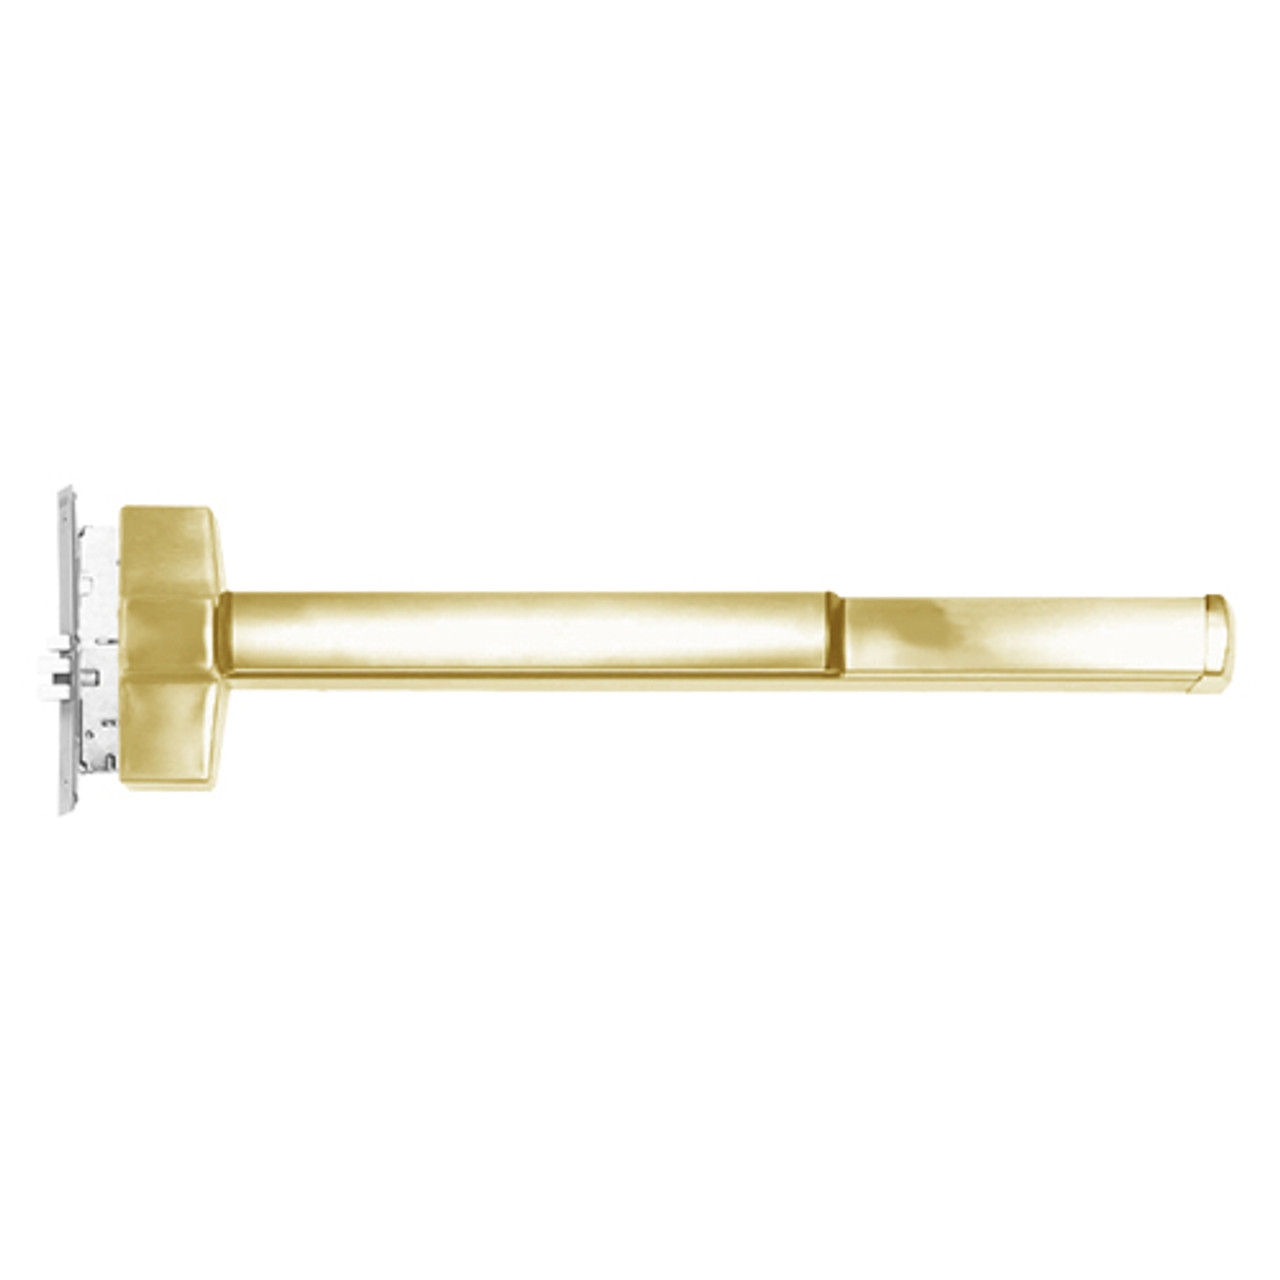 ED5600AL-606-W048-M61-LHR Corbin ED5600 Series Fire Rated Mortise Exit Device with Exit Alarm Device in Satin Brass Finish